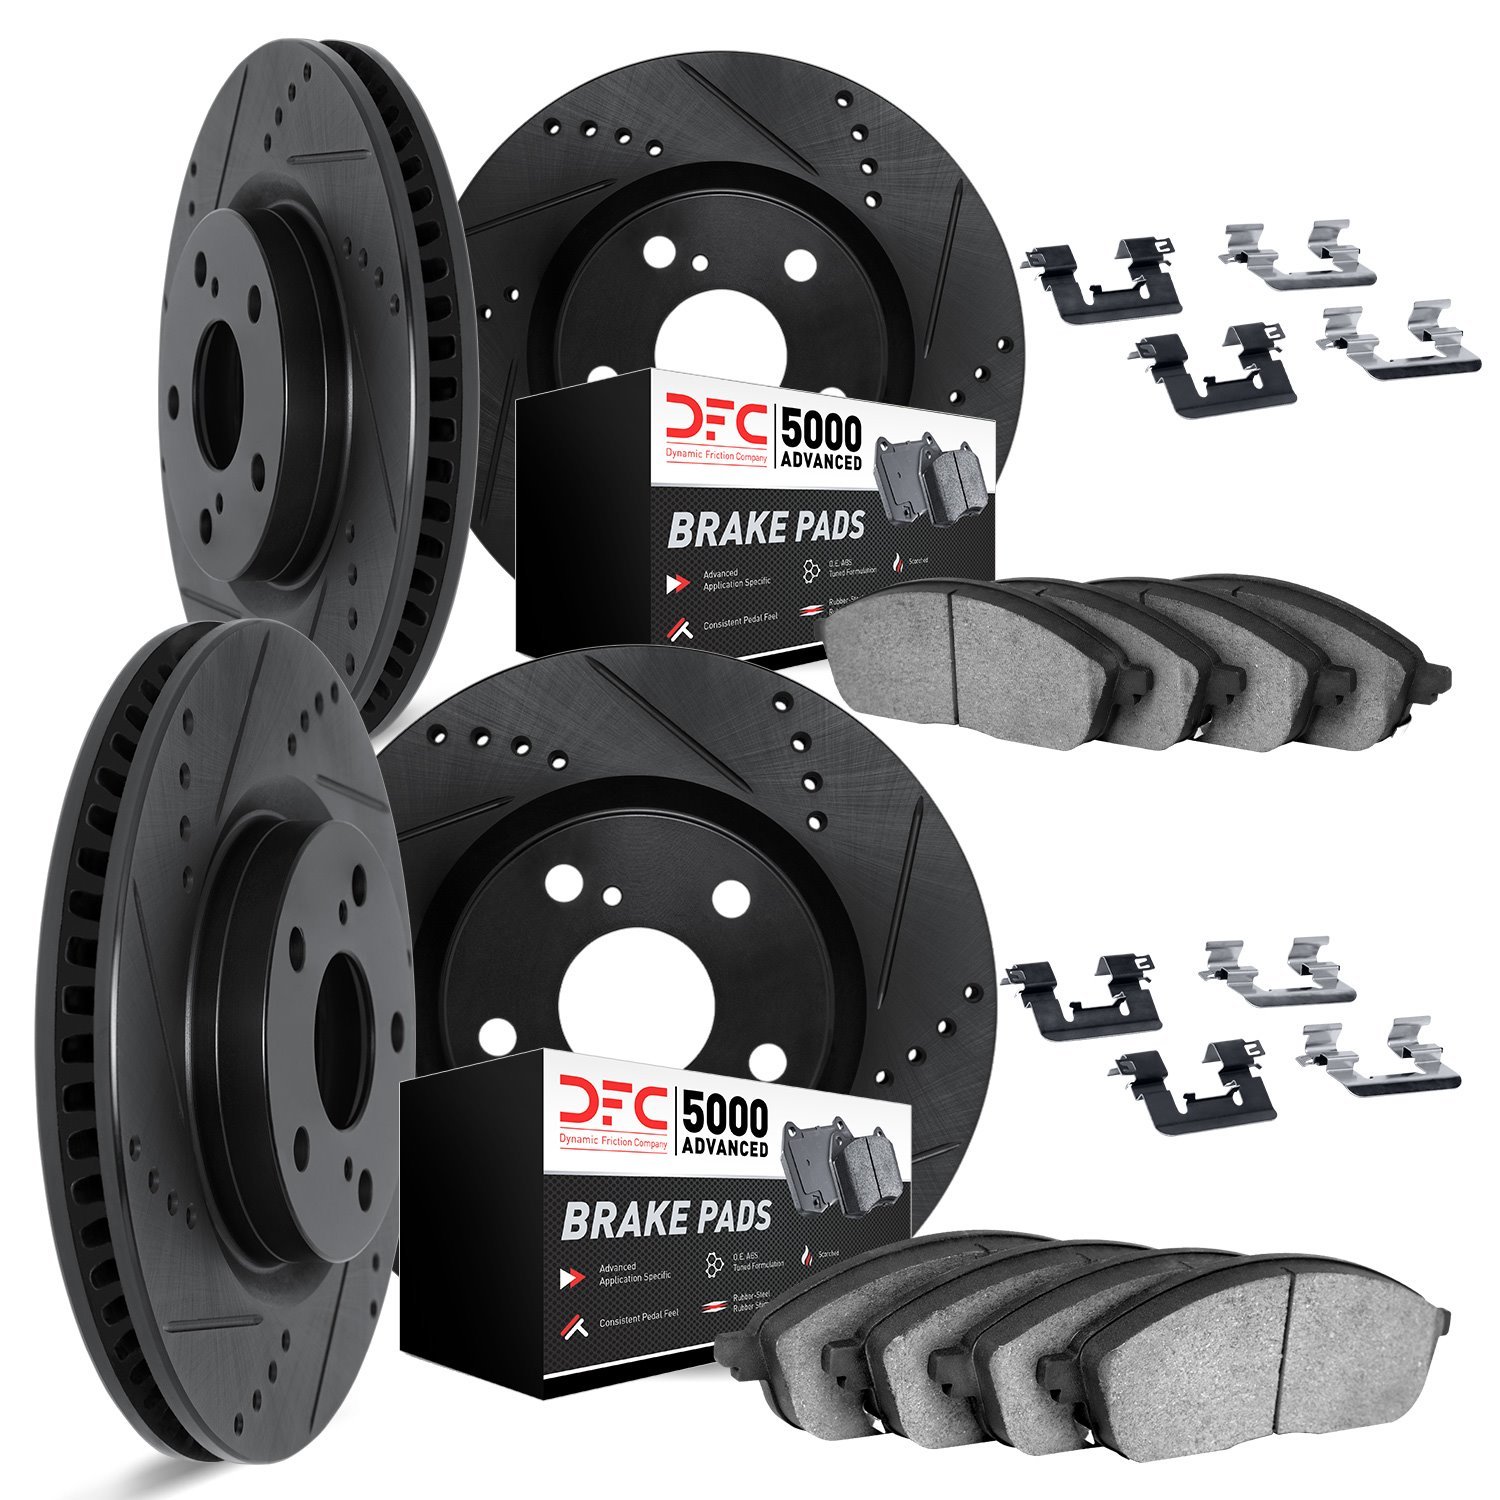 8514-31025 Drilled/Slotted Brake Rotors w/5000 Advanced Brake Pads Kit & Hardware [Black], 2007-2008 BMW, Position: Front and Re